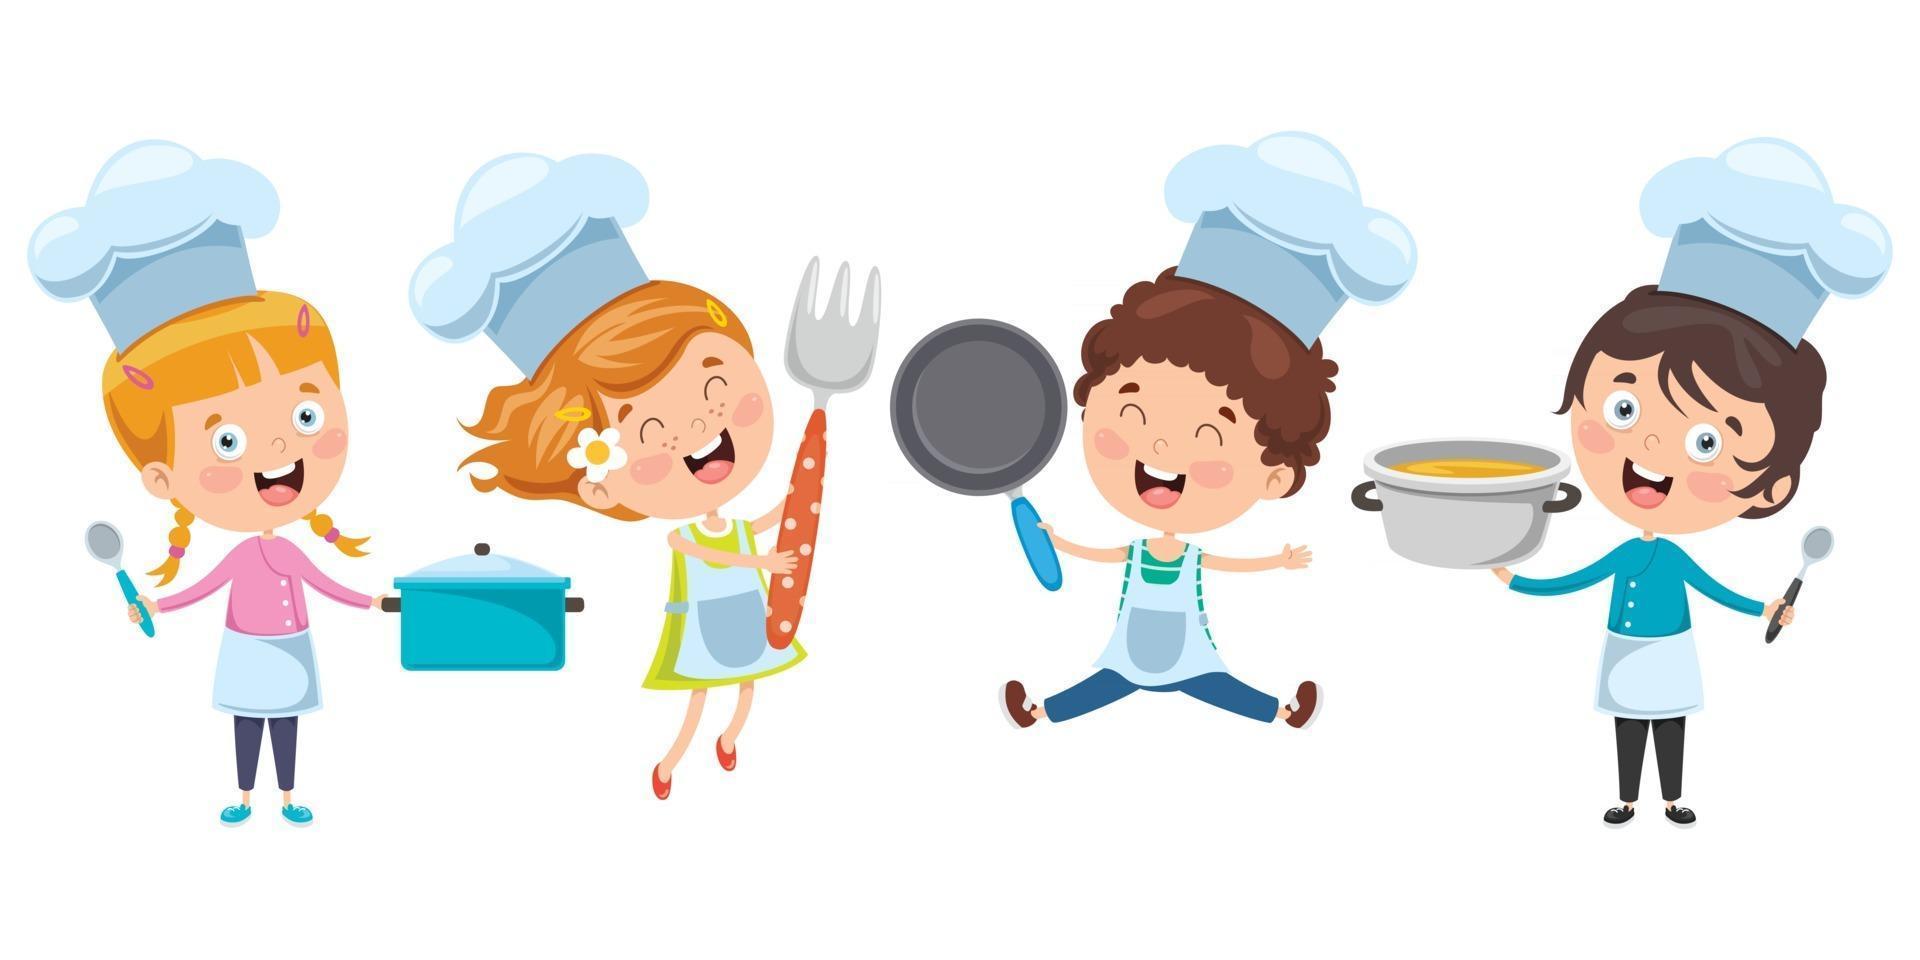 https://static.vecteezy.com/system/resources/previews/002/710/496/non_2x/happy-cute-little-chef-cooking-vector.jpg